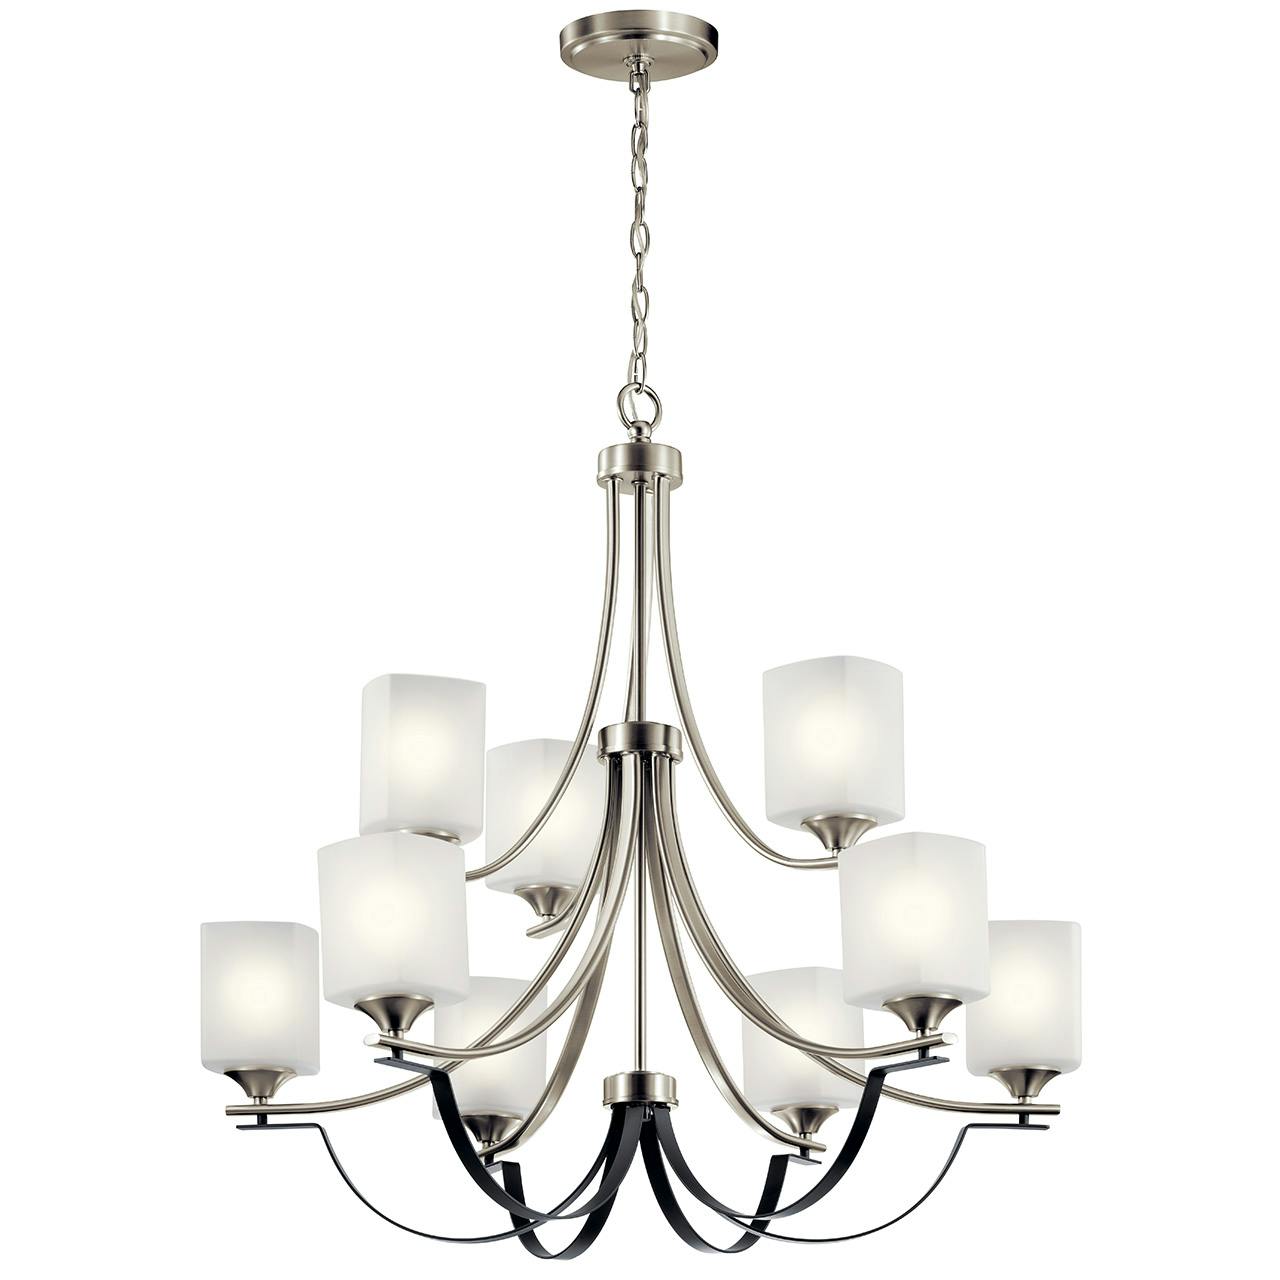 Tula™ 9 Light Chandelier Brushed Nickel on a white background